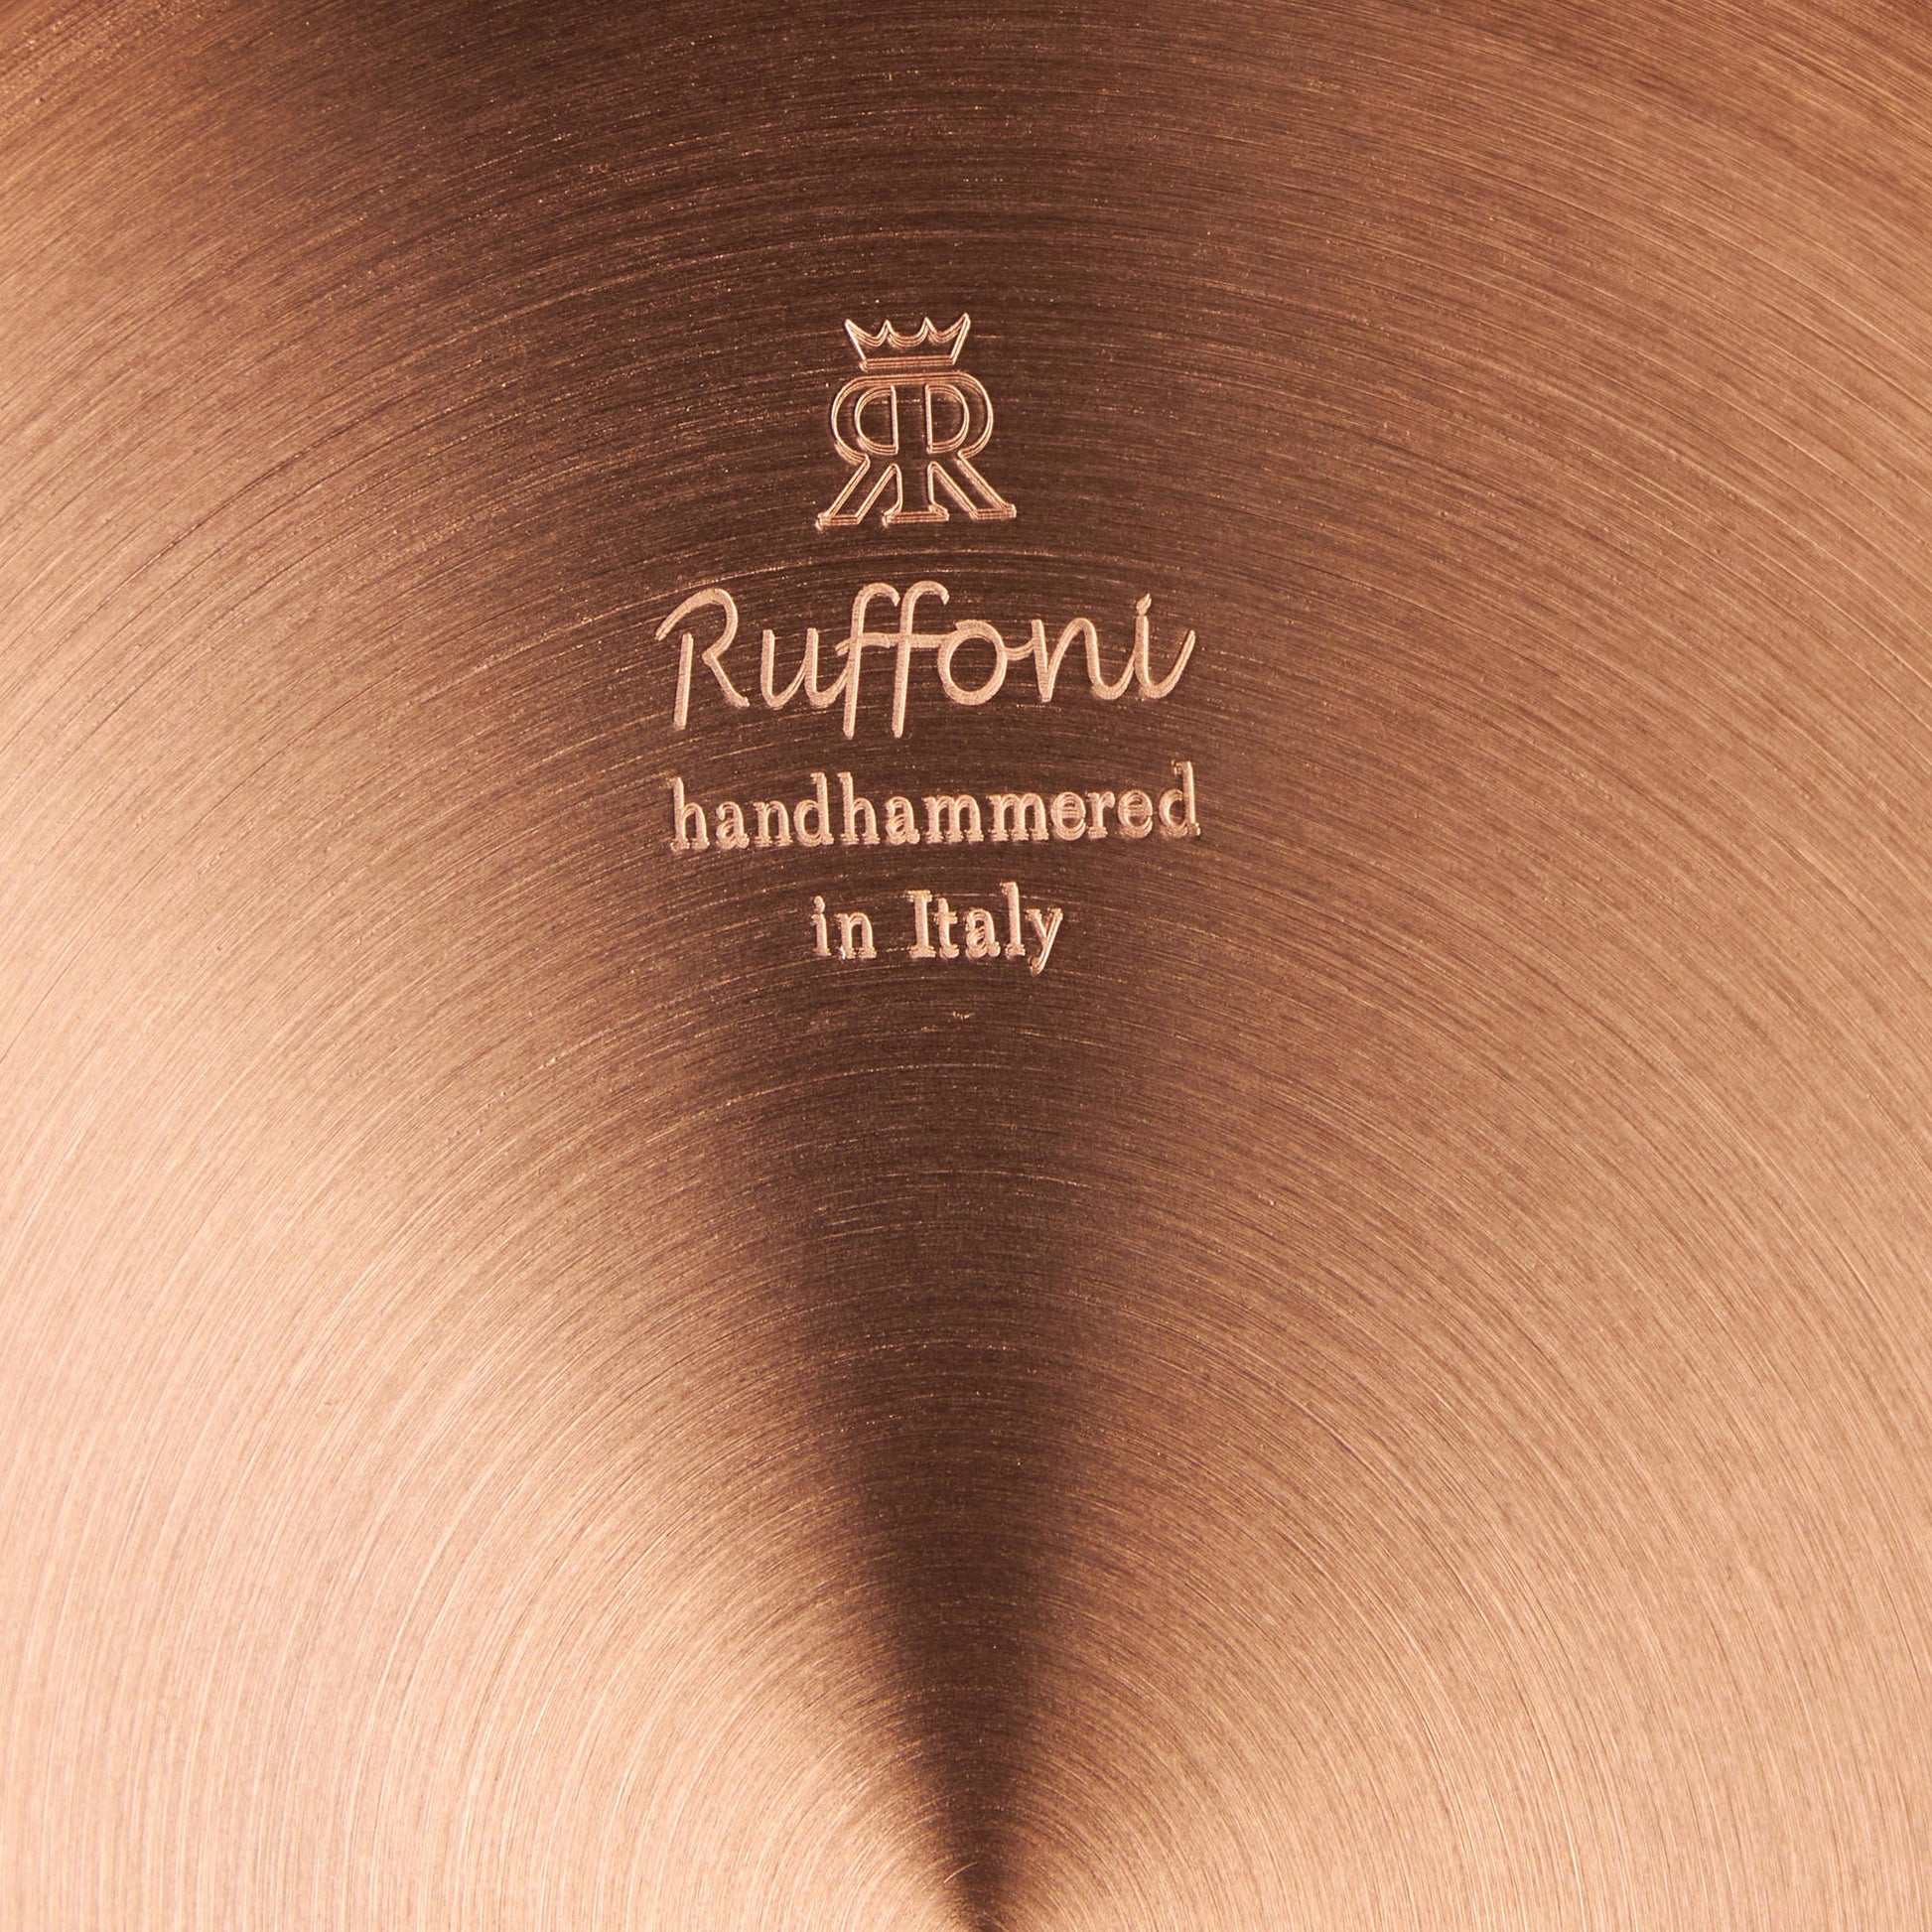 Ruffoni Made in Italy brand logo stamped under Opus Cupra copper 3.5 qt saucepan for authenticity